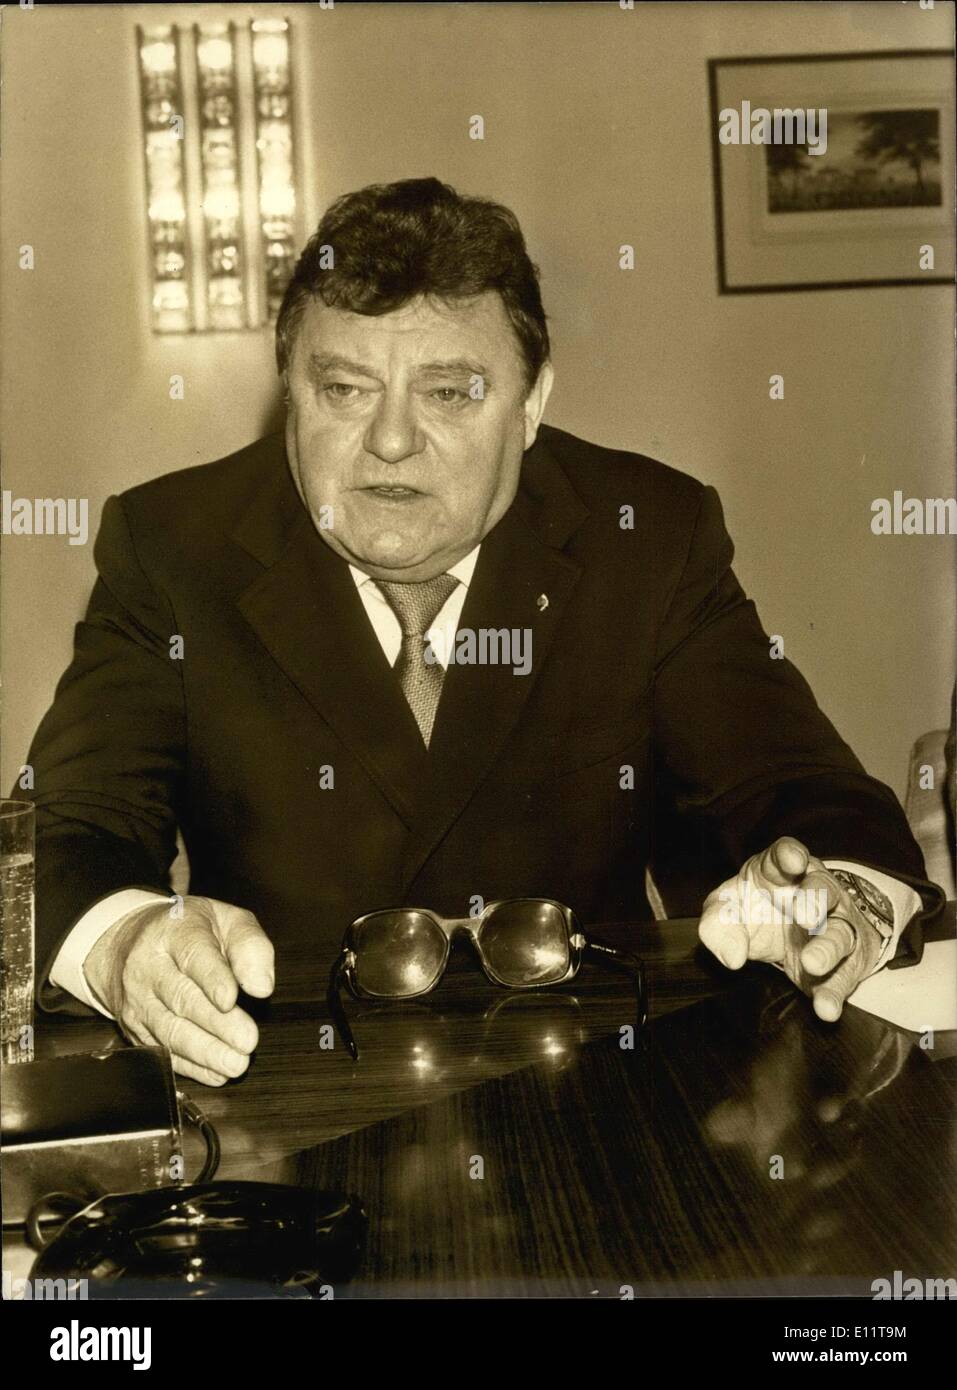 Feb. 13, 1980 - After having to meet the Senate President, Prime Minister Raymond Barre, the Minister of Foreign Affairs, and the President of the National Assembly in Paris, Mr. Franz Josef Strauss the Minister President of Bavaria , held a press conference in Paris. Stock Photo